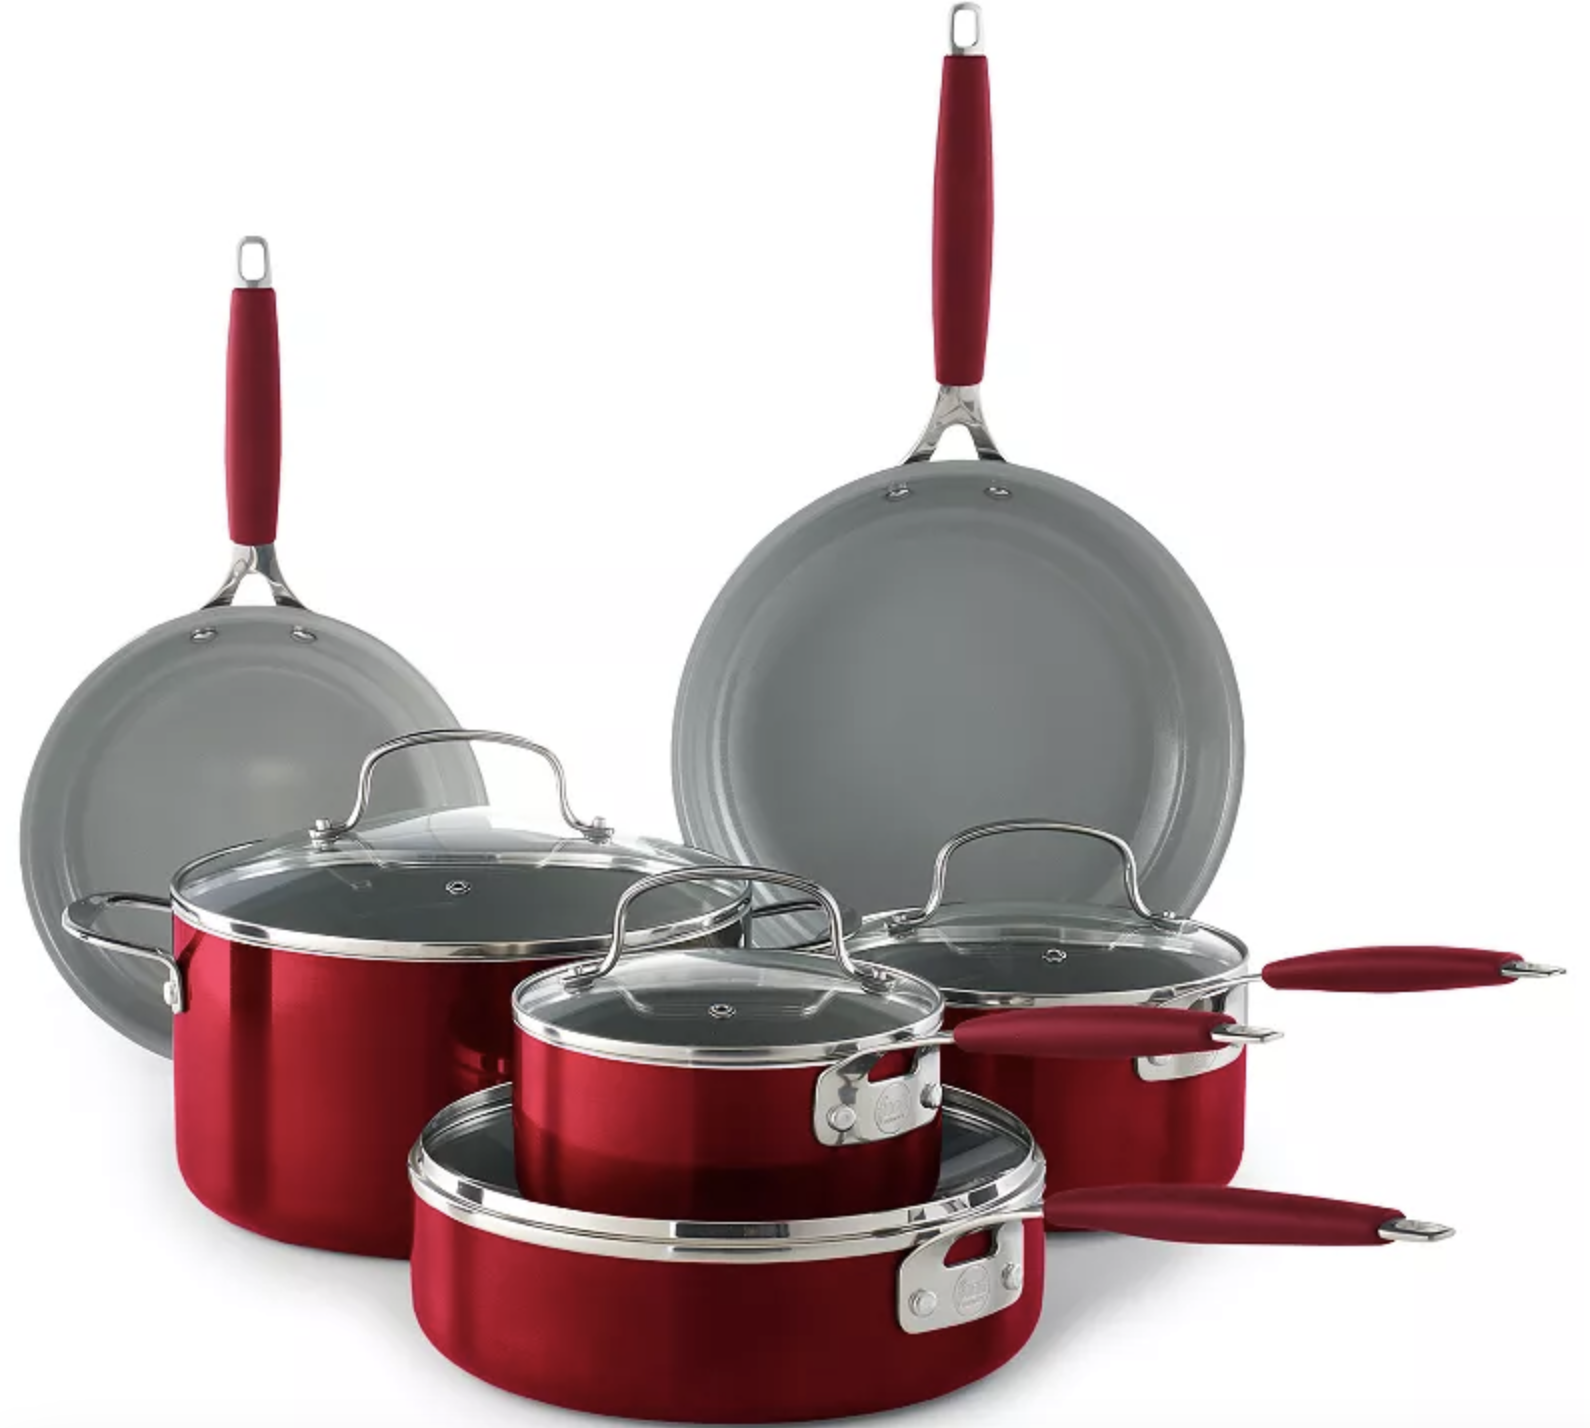 Meals Community 10-Piece Nonstick Ceramic Cookware Set solely $55.24 shipped + $10 in Kohl’s Money (Reg. $130!)